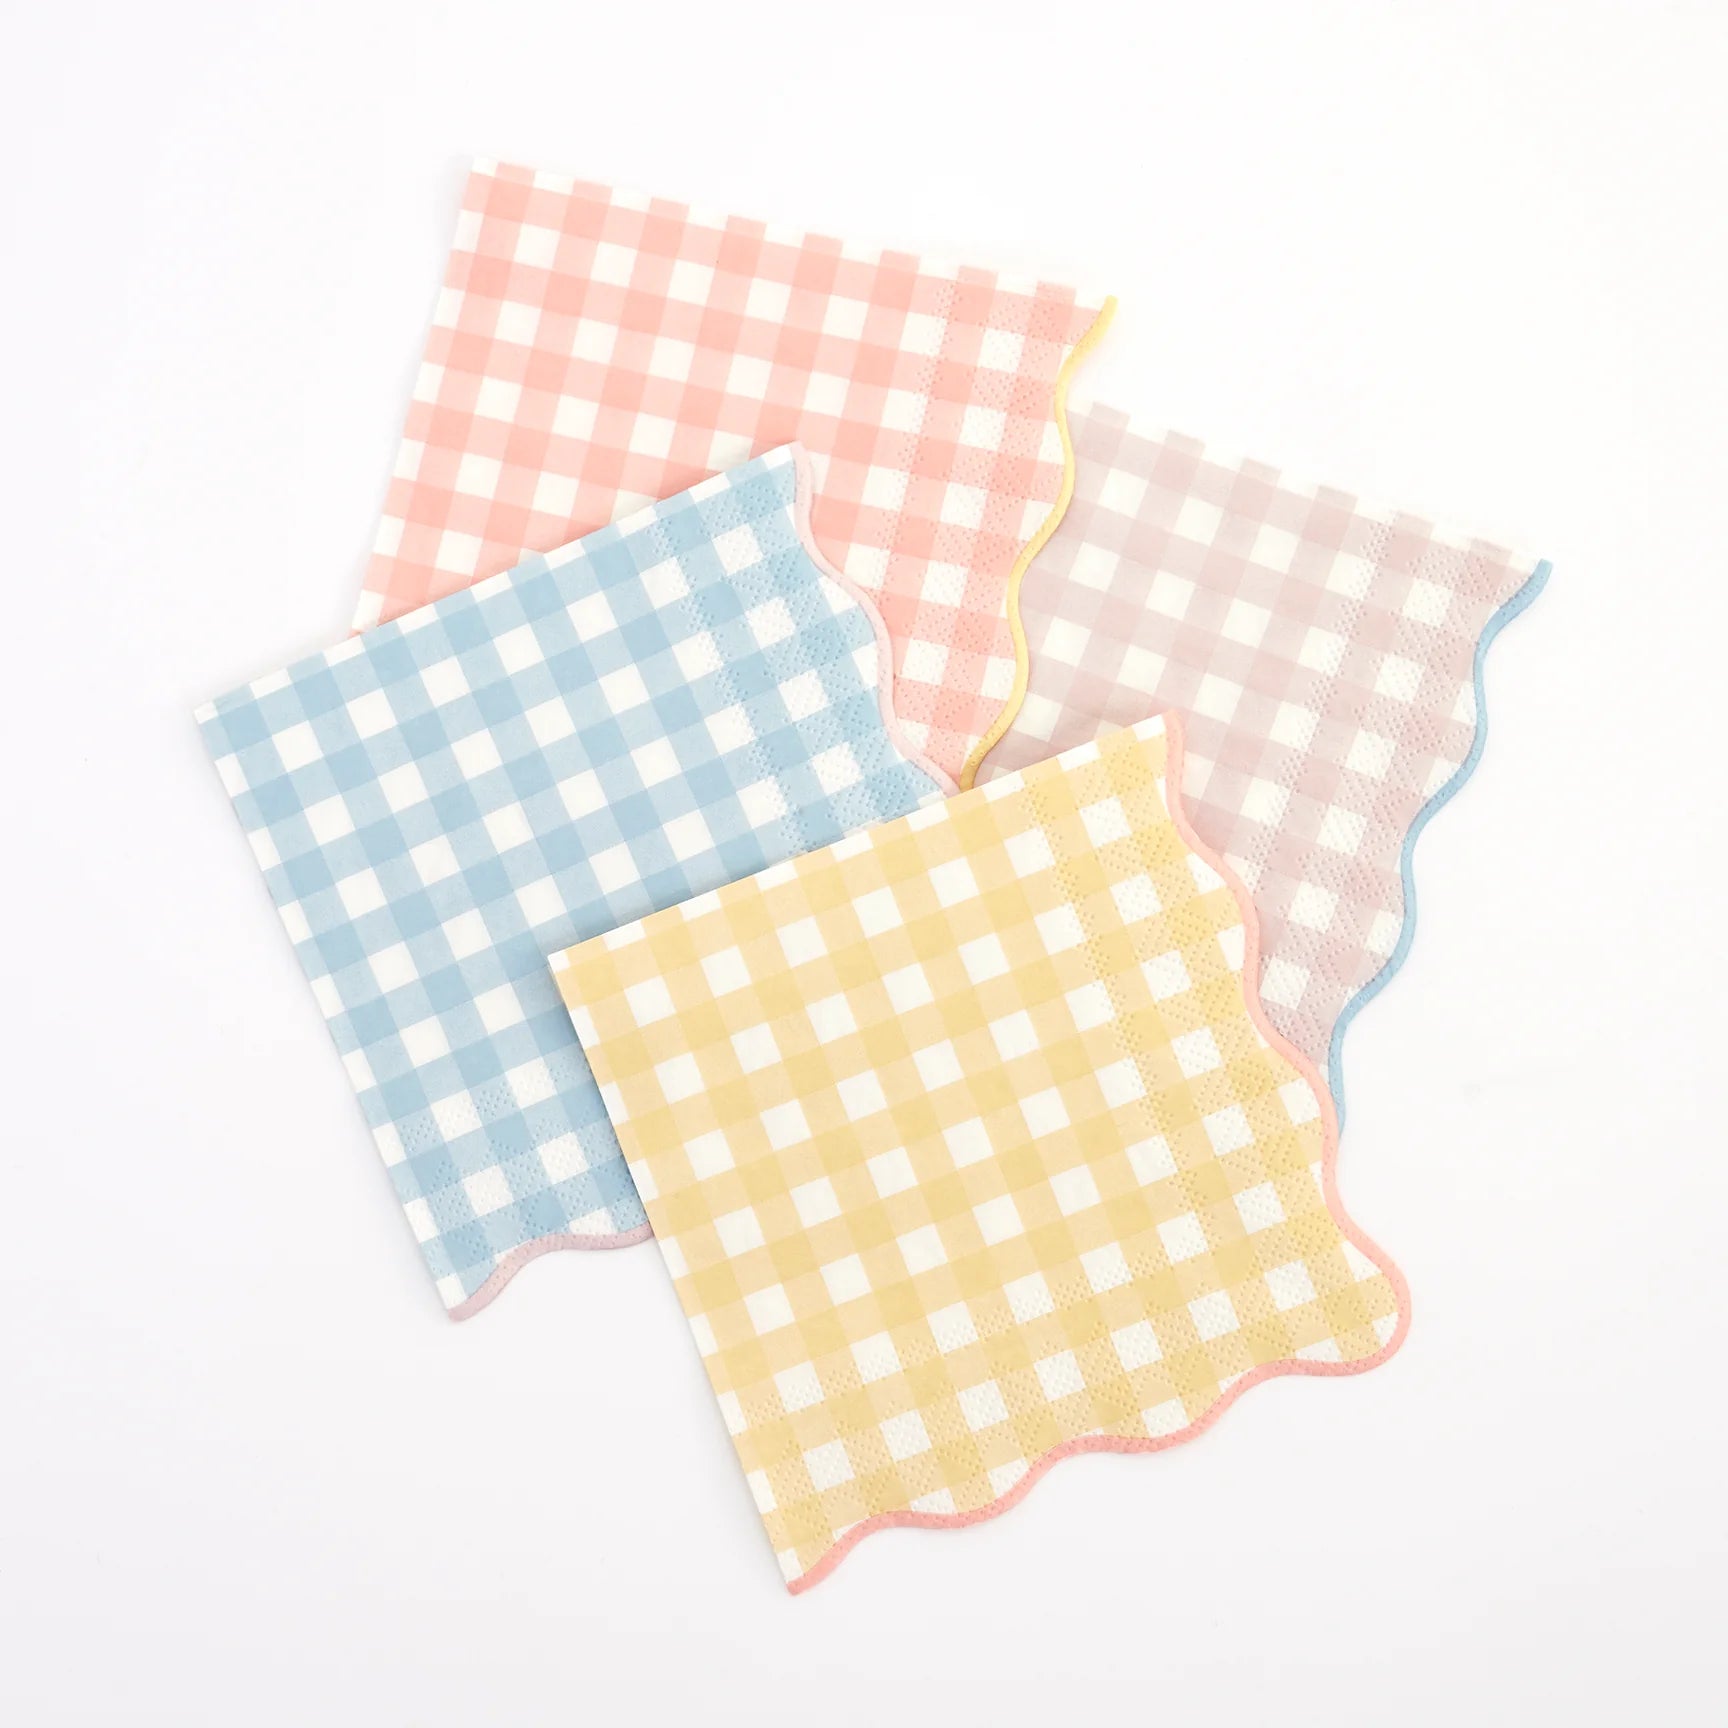 Pastel Gingham Scalloped Dessert Napkins 20ct | The Party Darling